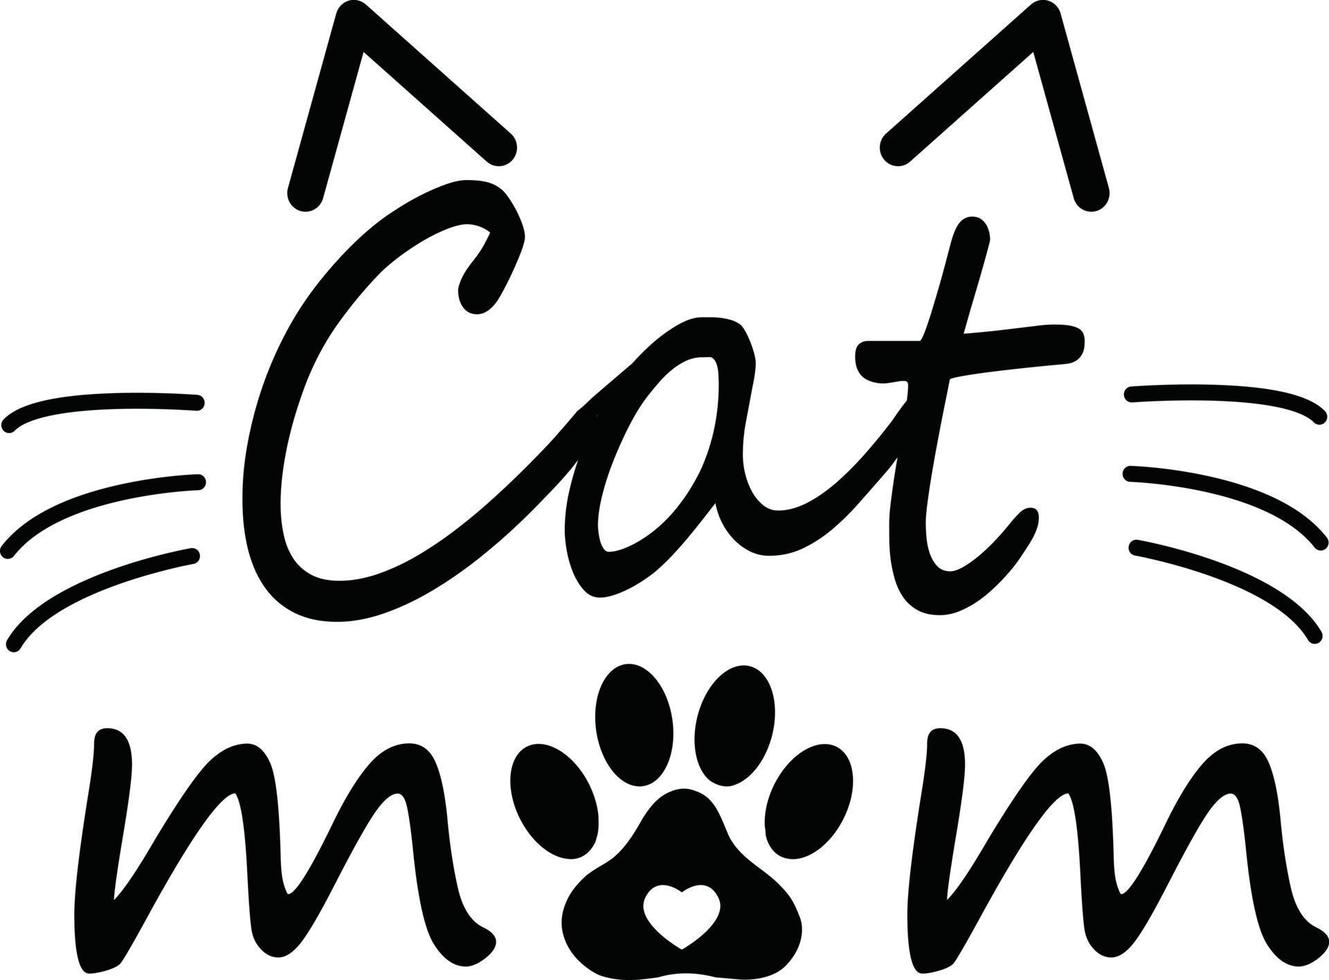 cat mom lettering with paws silhouette on white background. cat mom sign. cat mom t shirt design. vector